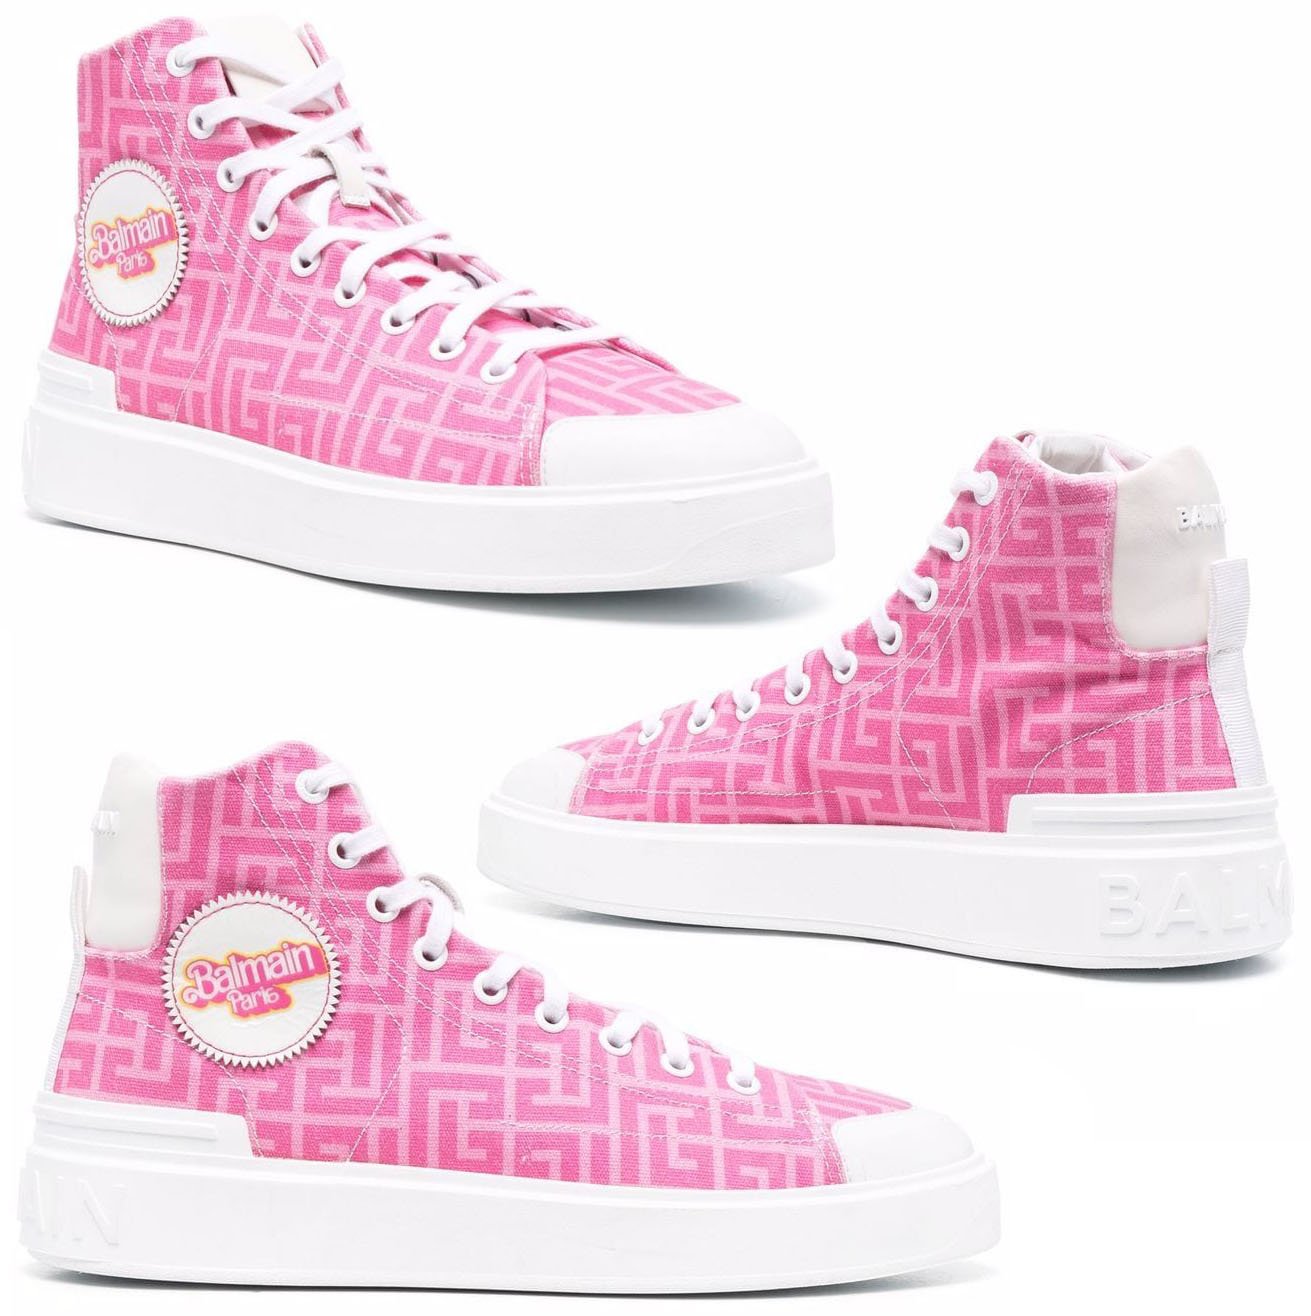 Barbie's pink signature color is incorporated on these monogrammed Balmain B-Court hi-tops, complete with a Balmain Paris logo patch on the outer side